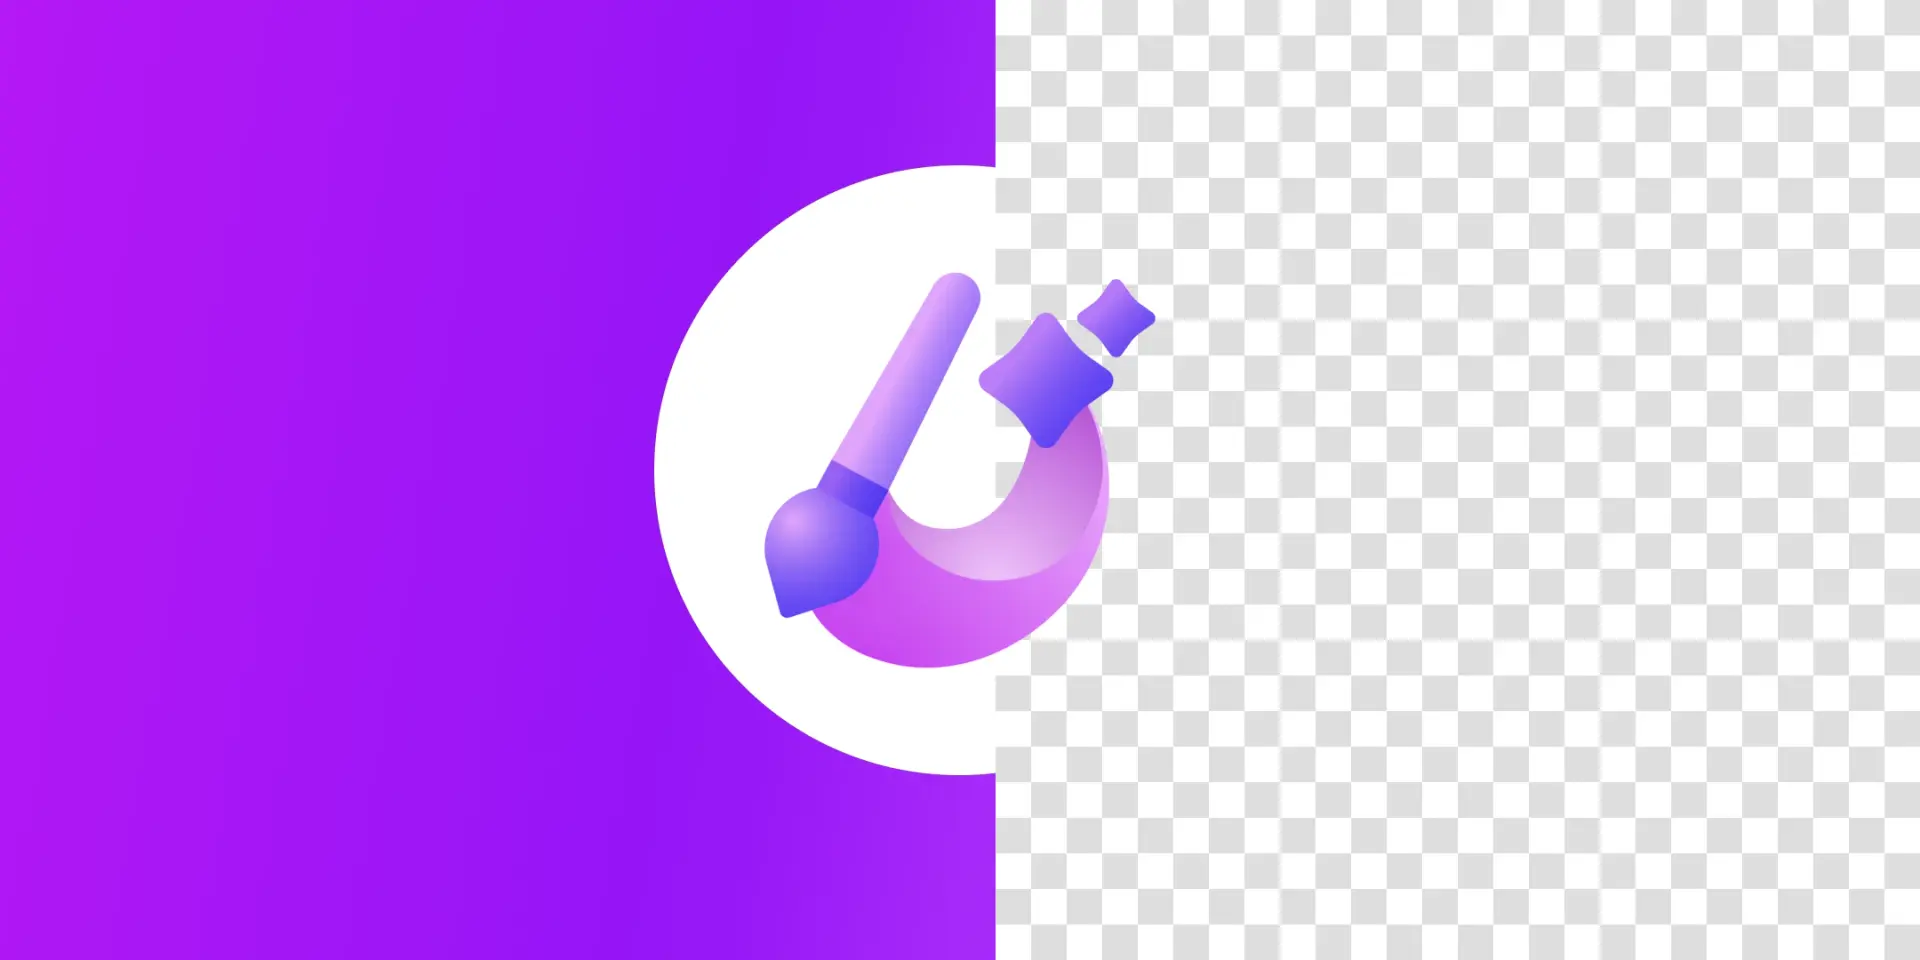 A purple Microsoft Designer logo in a white circle set on a background that's purple on one side and checkered on the other. 